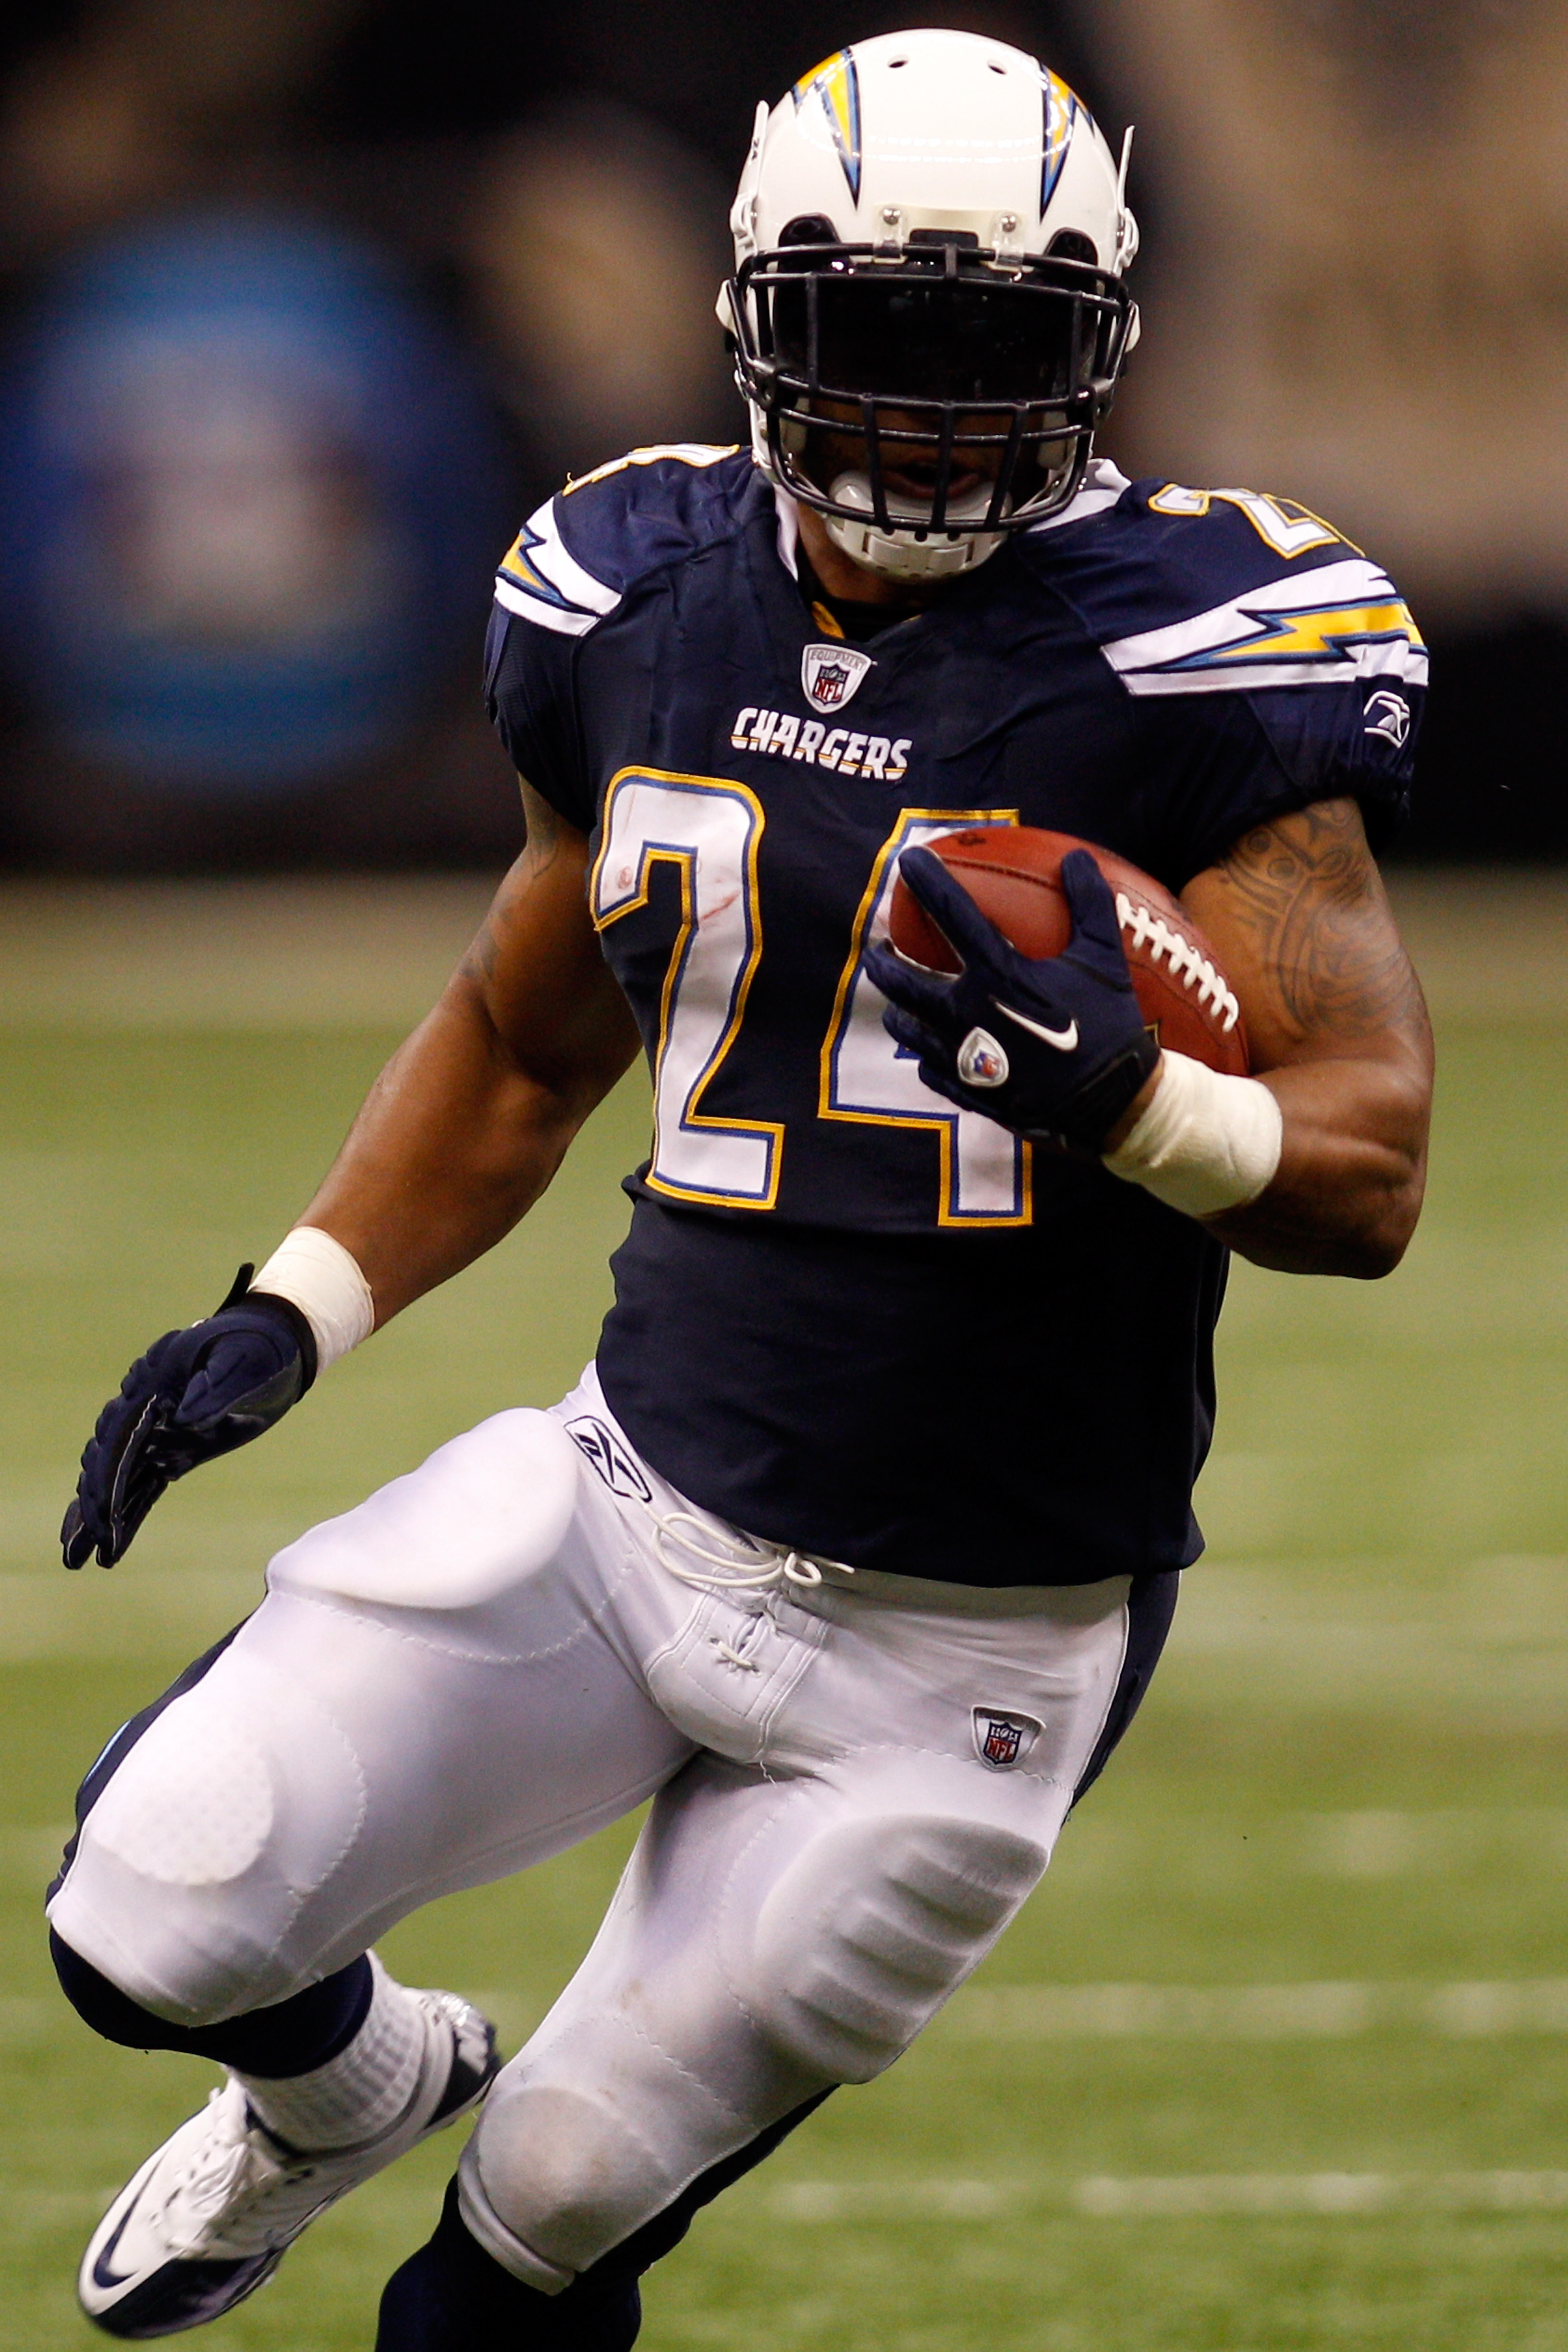 NEW ORLEANS - AUGUST 27:  Ryan Mathews #24 of the San Diego Chargers in action against the New Orleans Saints at the Louisiana Superdome on August 27, 2010 in New Orleans, Louisiana.  (Photo by Chris Graythen/Getty Images)